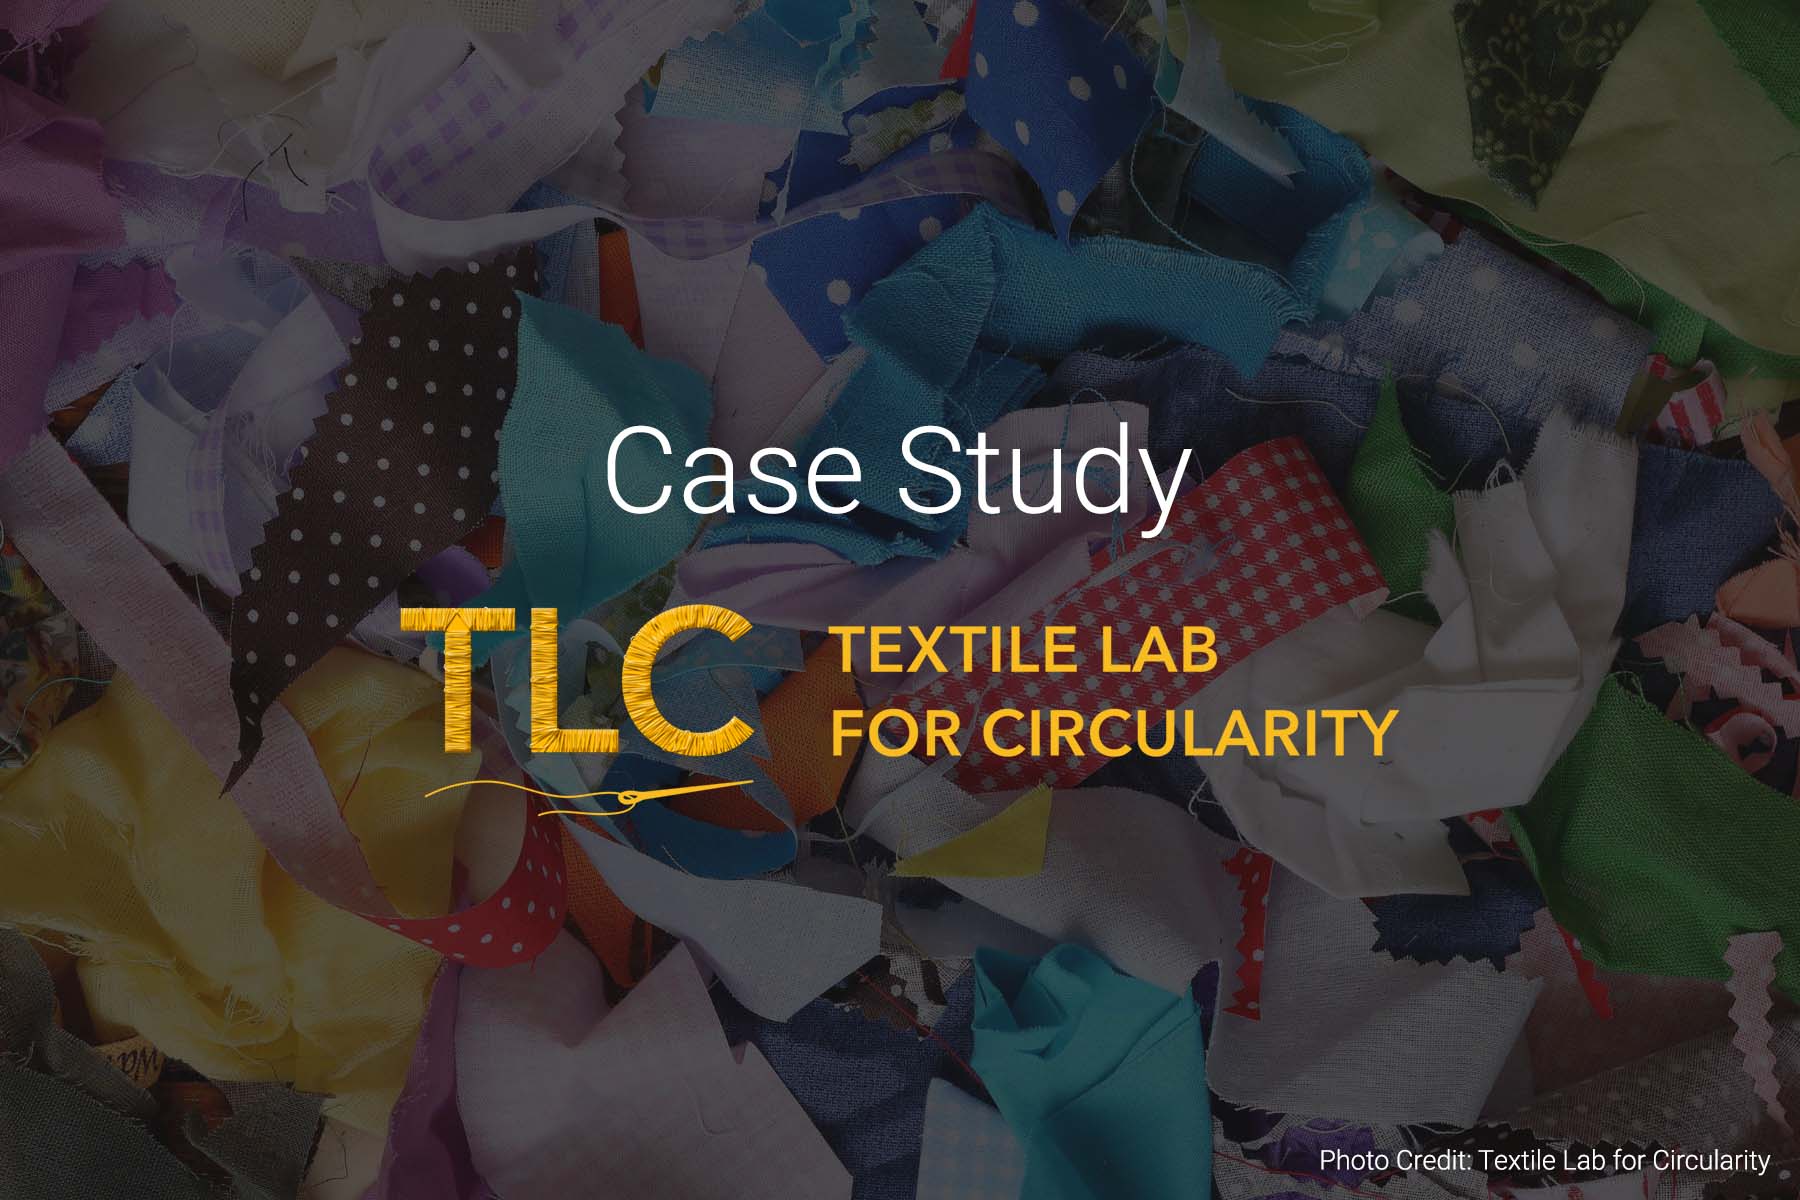 'case study' and textile lab for circularity logo over pile of multicolored fabric scraps